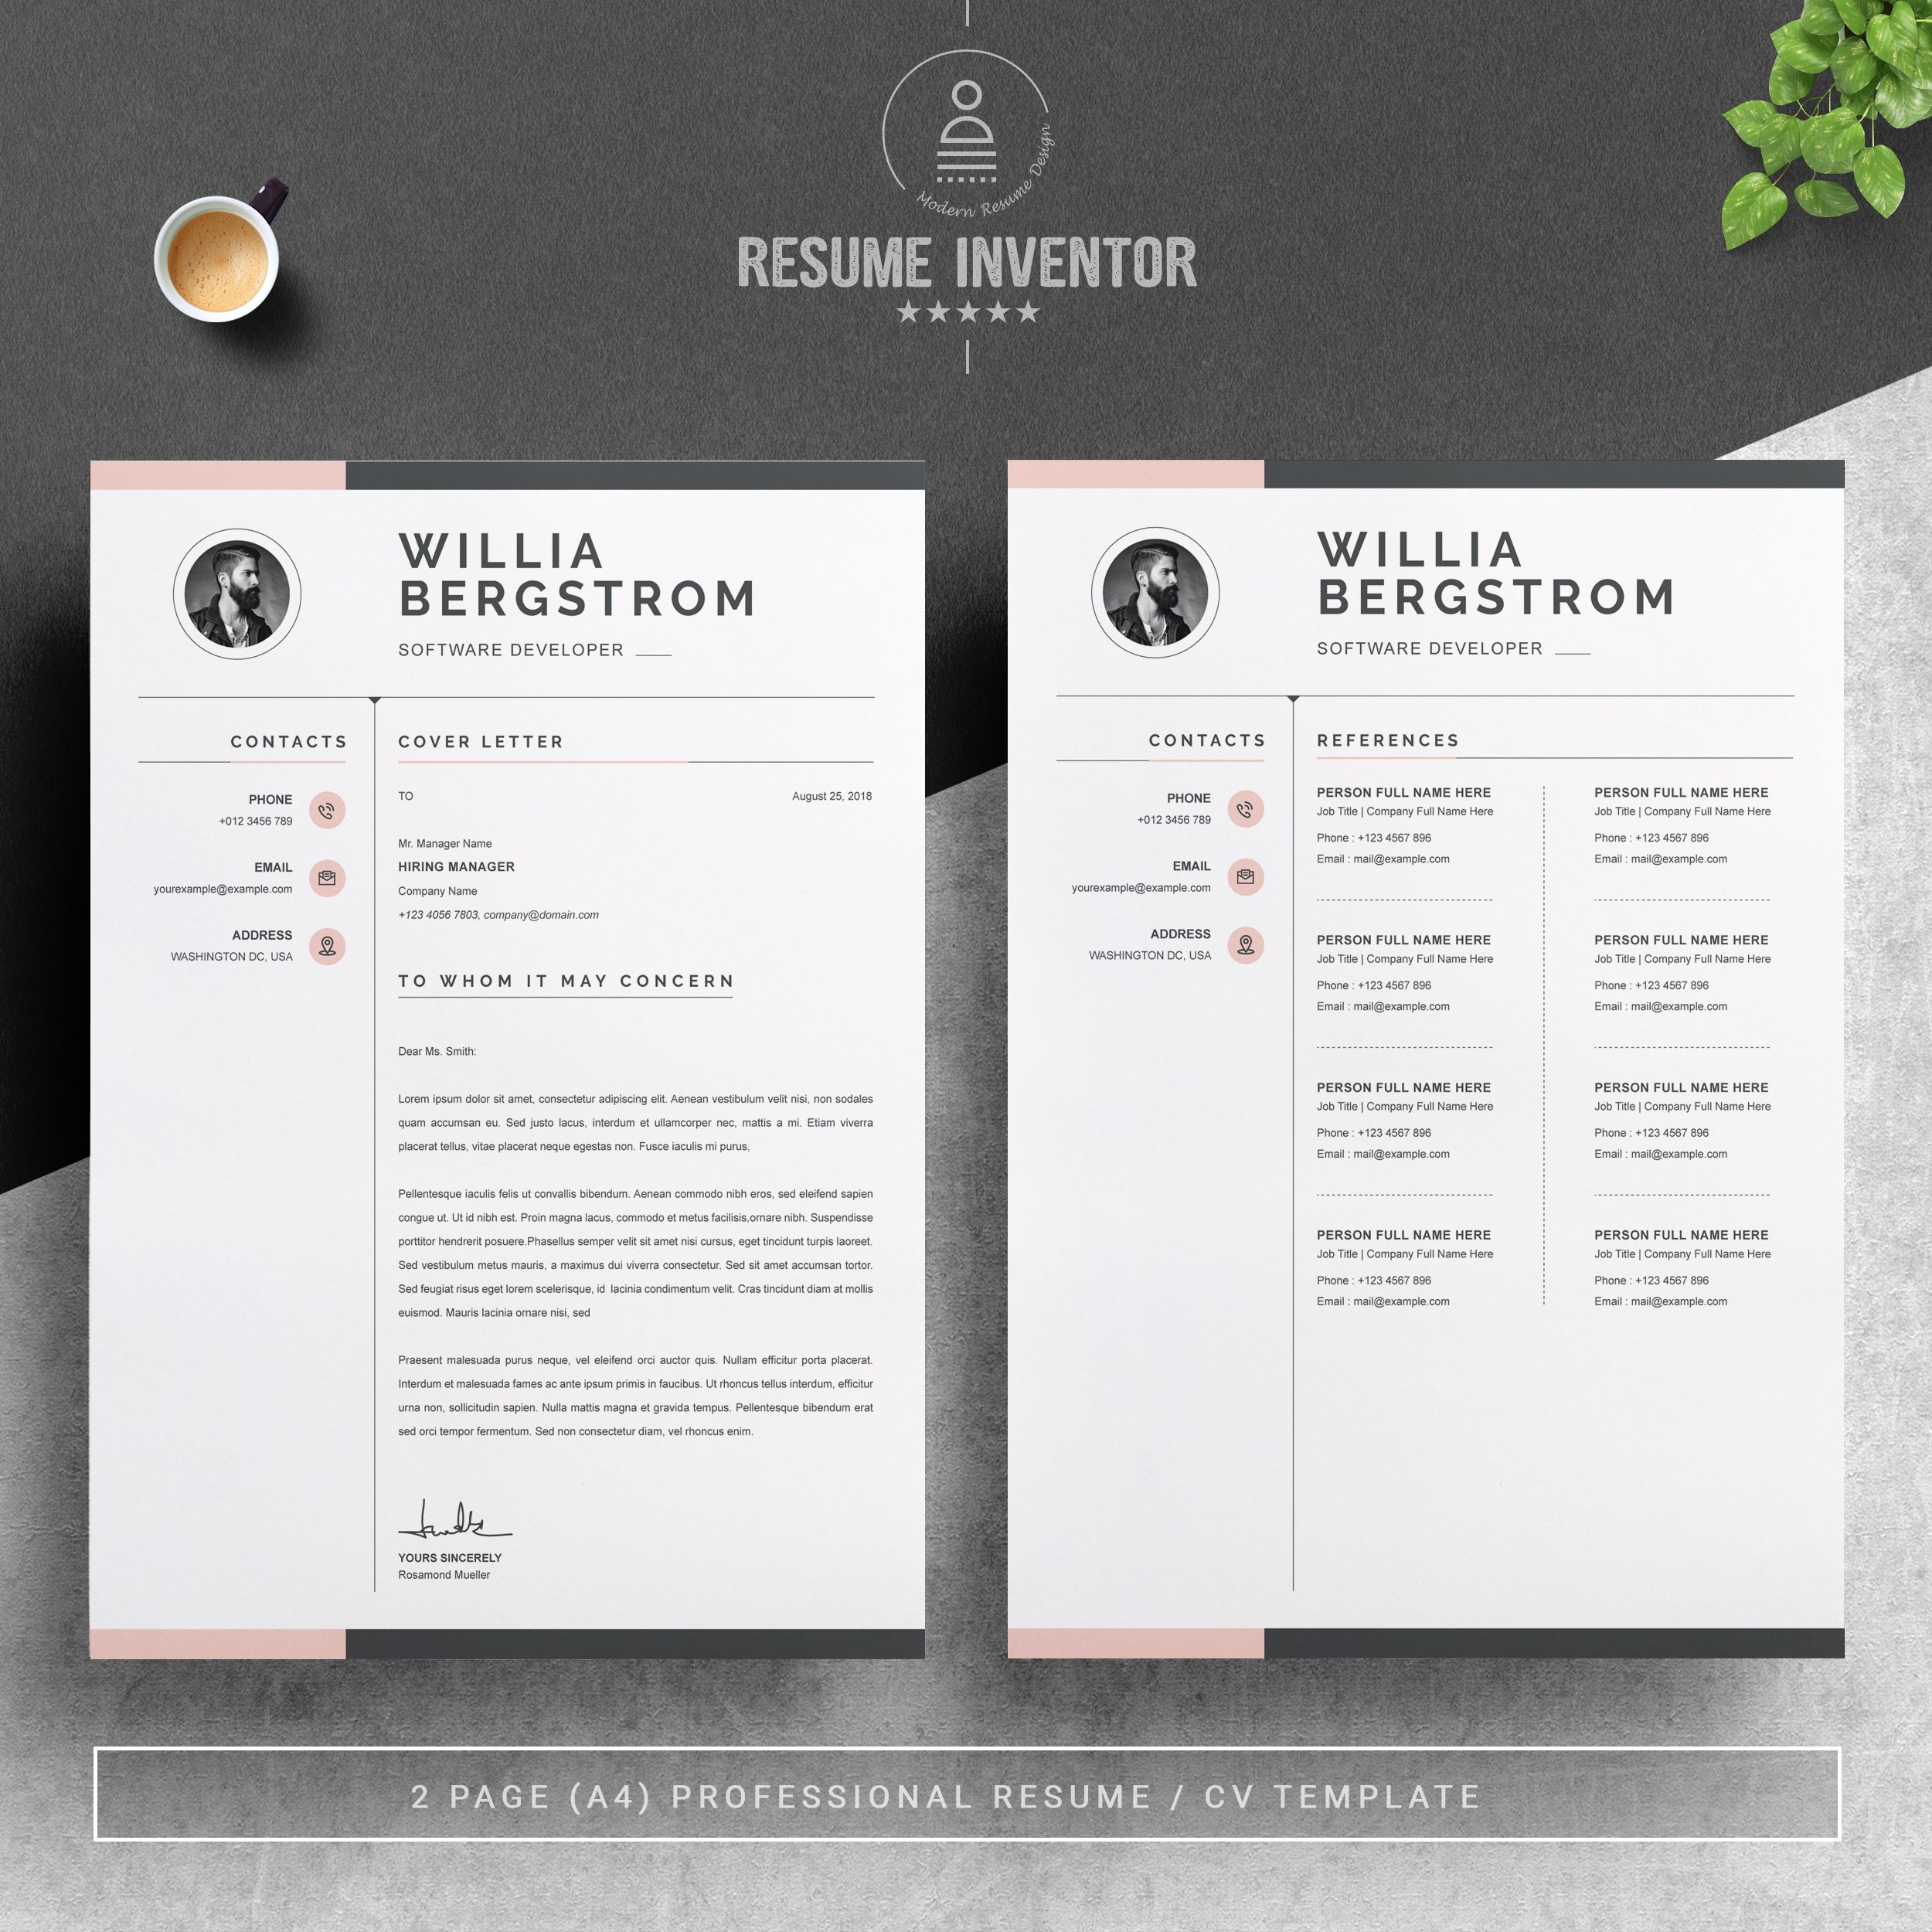 03 2 pages free resume design template 47